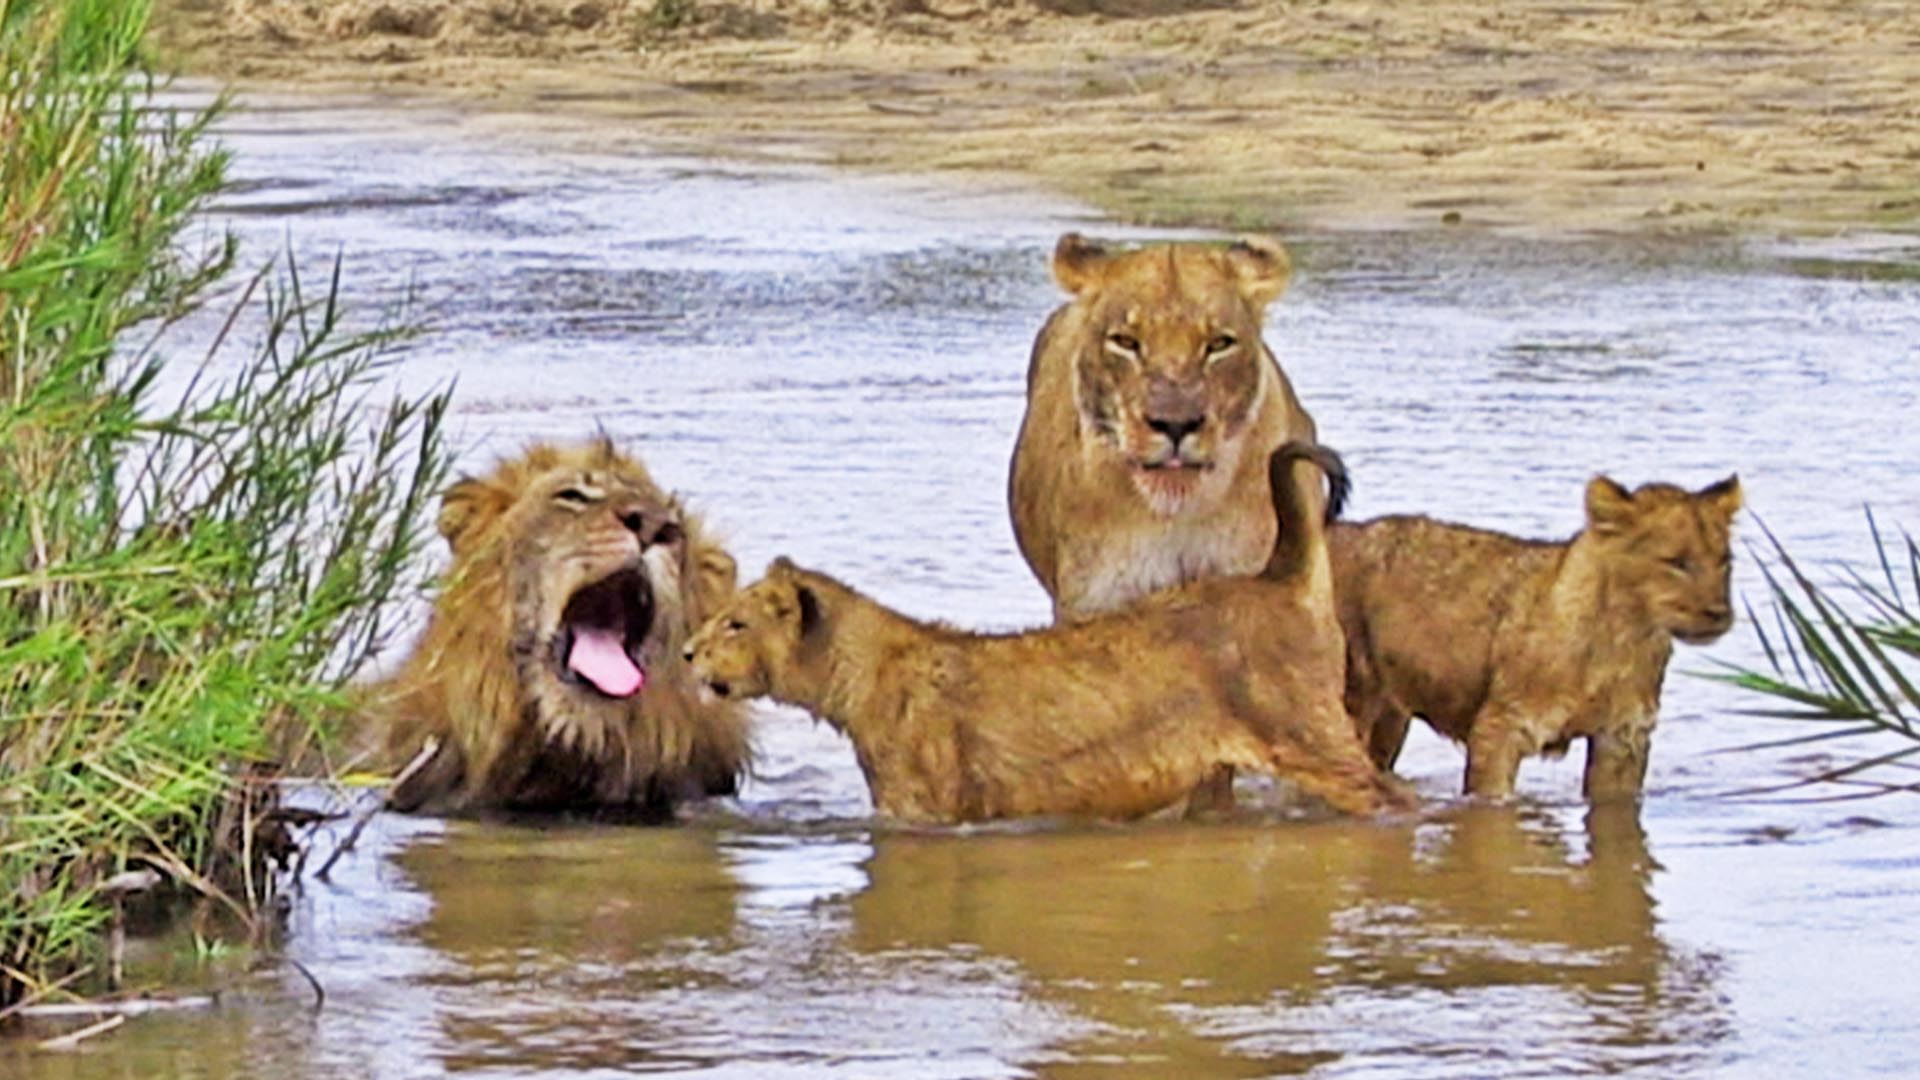 Lion Family Fun-Day at the Beach!